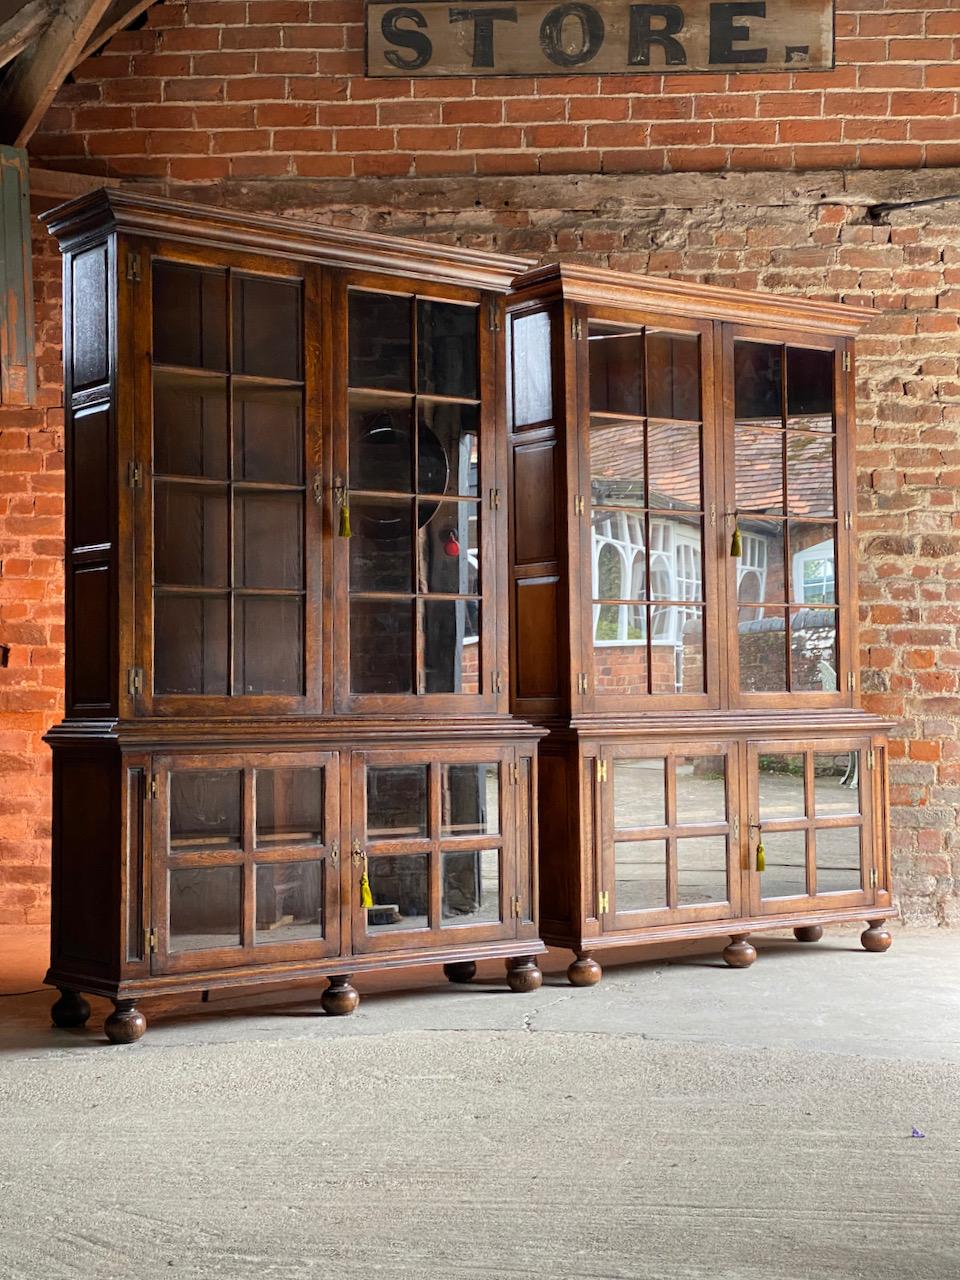 Pair of antique Pepys bookcases matching pair oak mid twentieth century

A magnificent pair of tall and imposing 18th century Pepys style solid English oak library bookcases dating to mid twentieth century England, the upper section with moulded